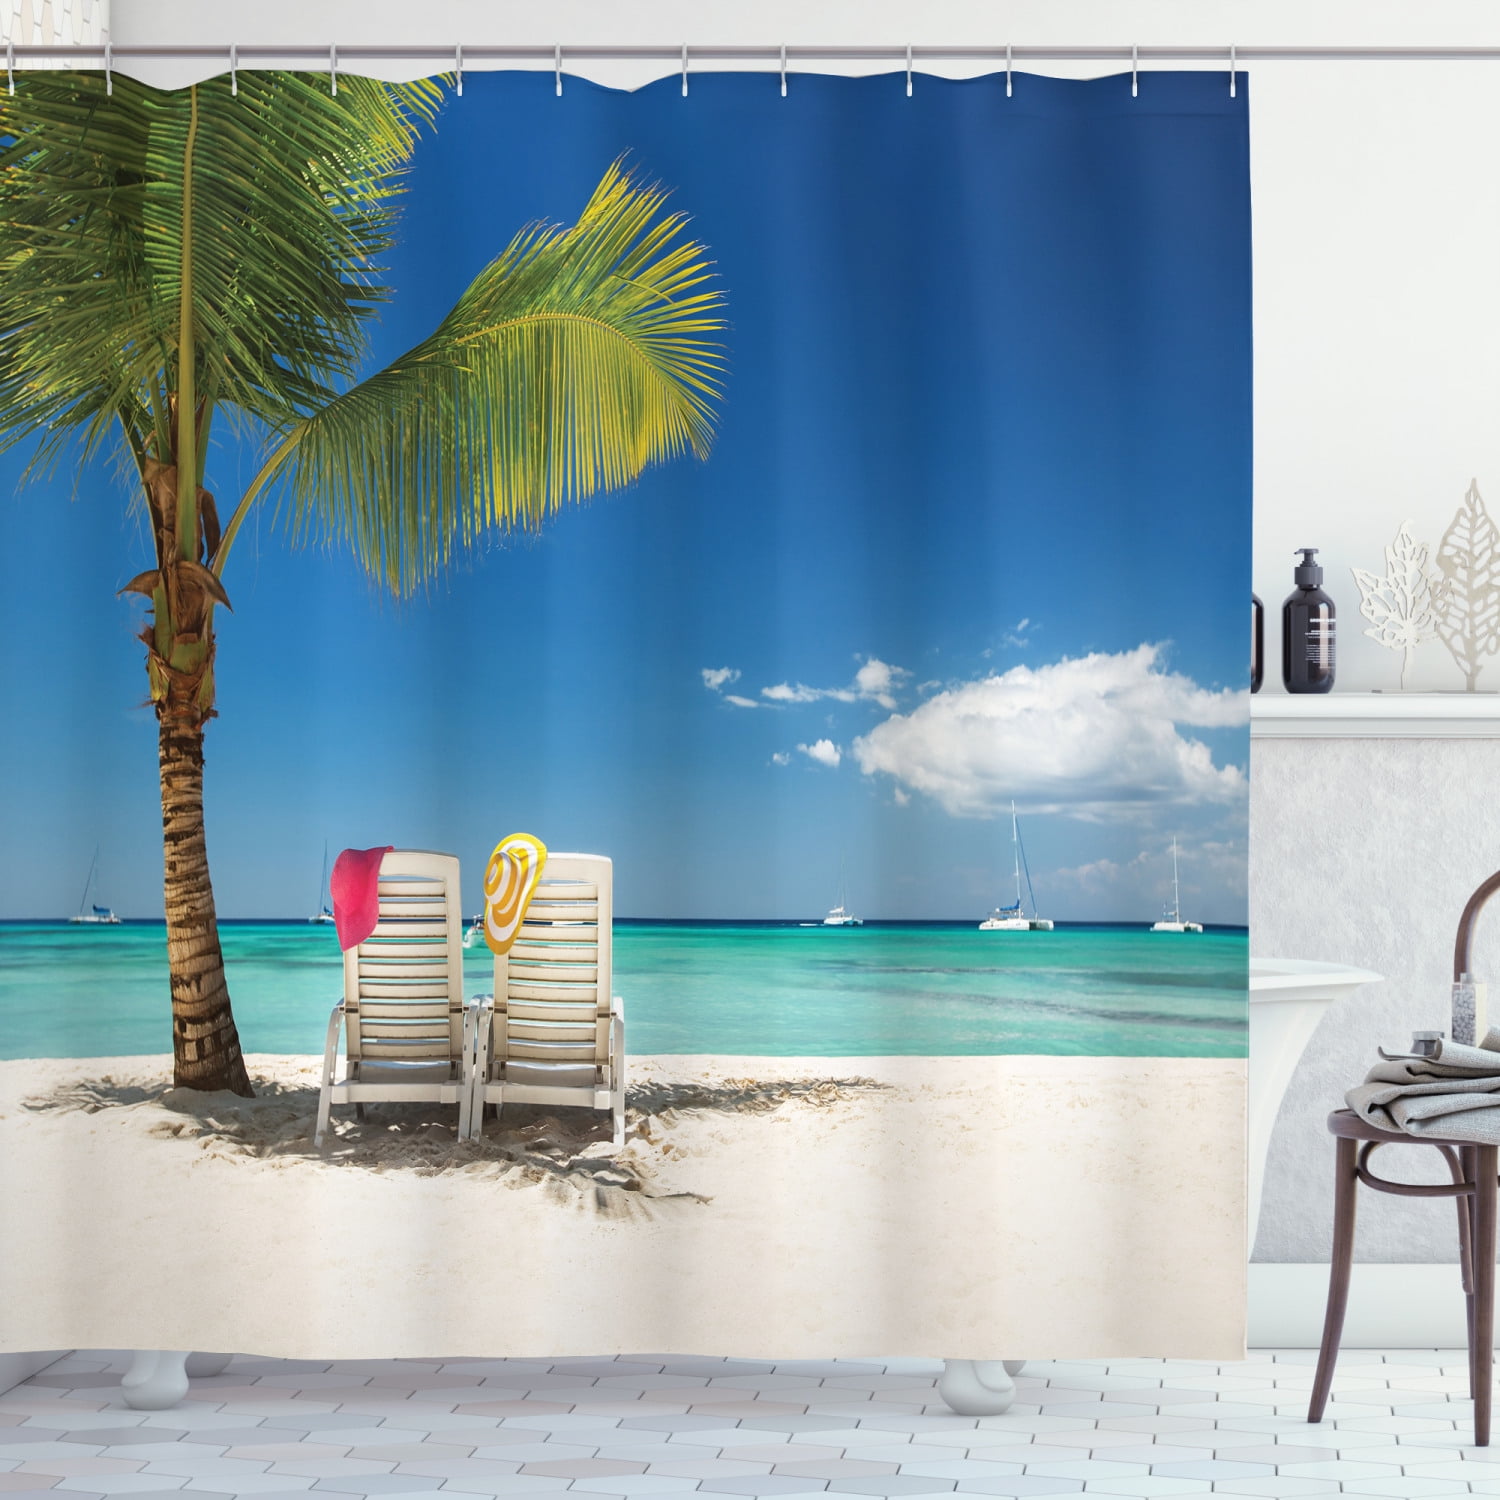 Wooden Chairs on Relaxing Lakeside at Sunset Canada Image Shower Curtain Set 